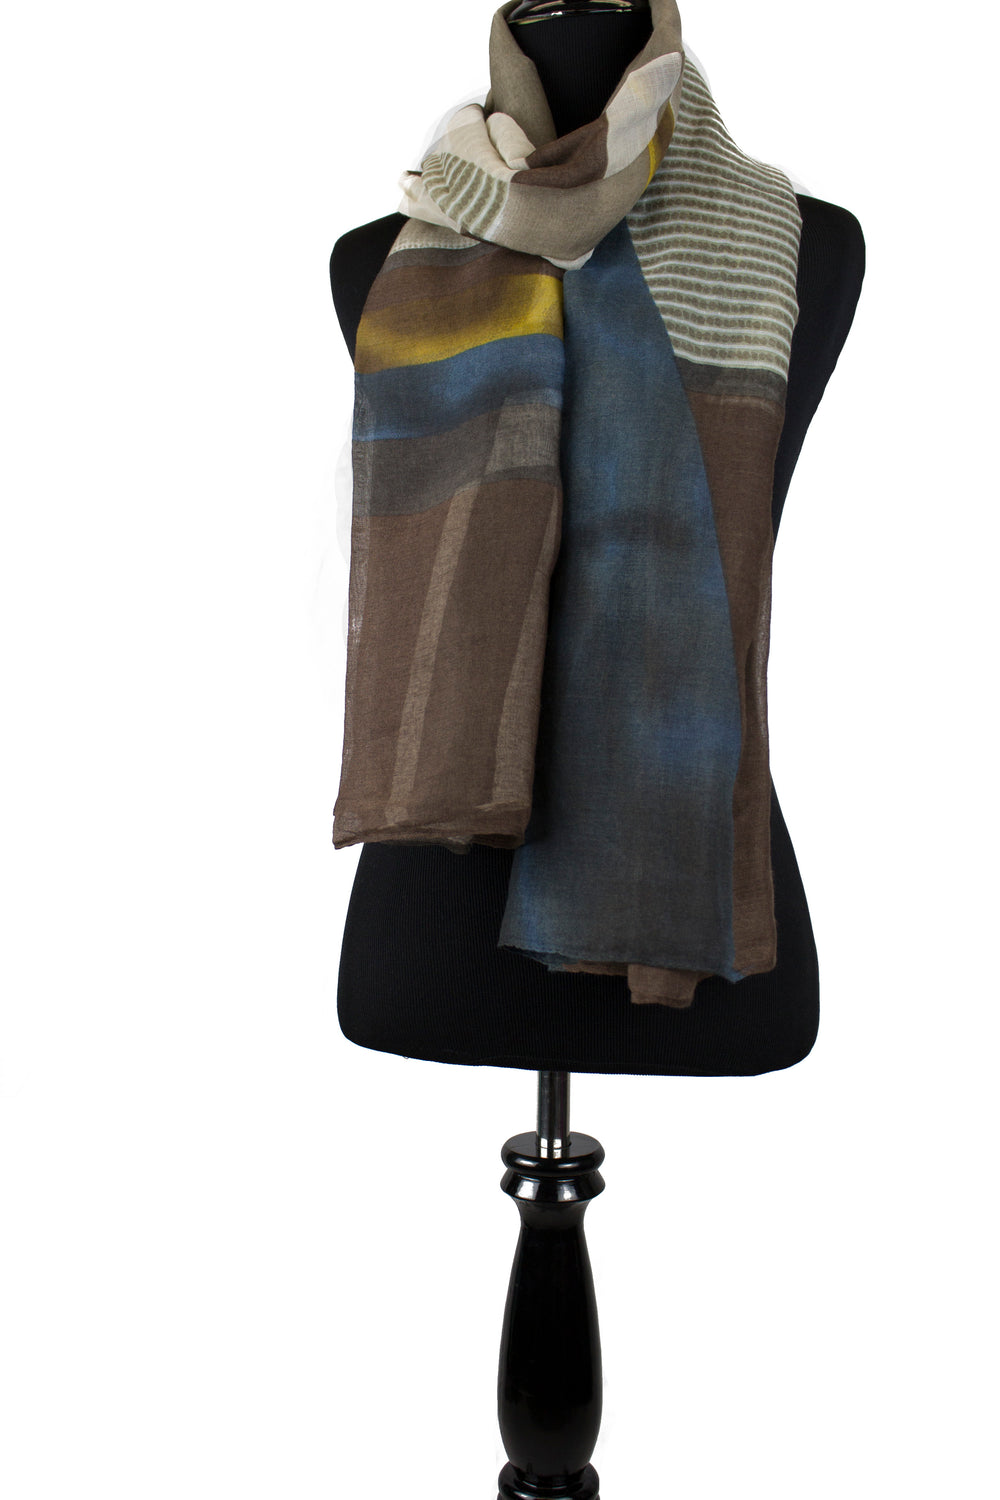 print hijab with abstract shapes in brown yellow blue and tan